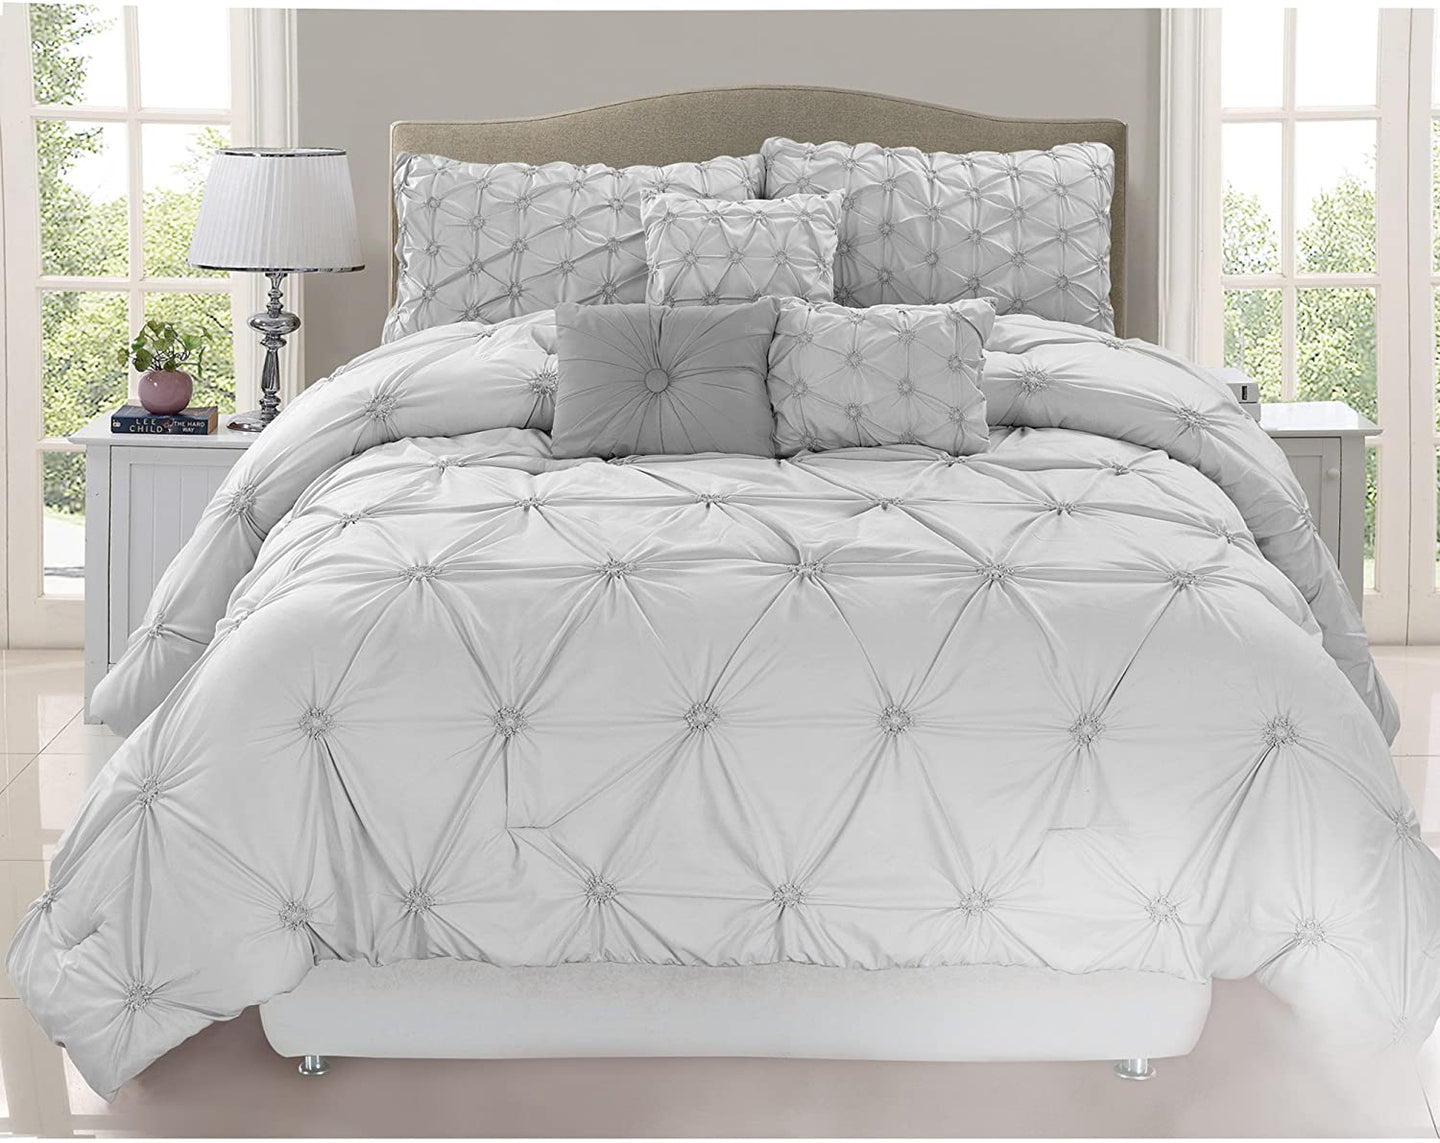 Safdie & Co. Chateau Collection Chateau 7Piece Comforter Set, Full/Queen